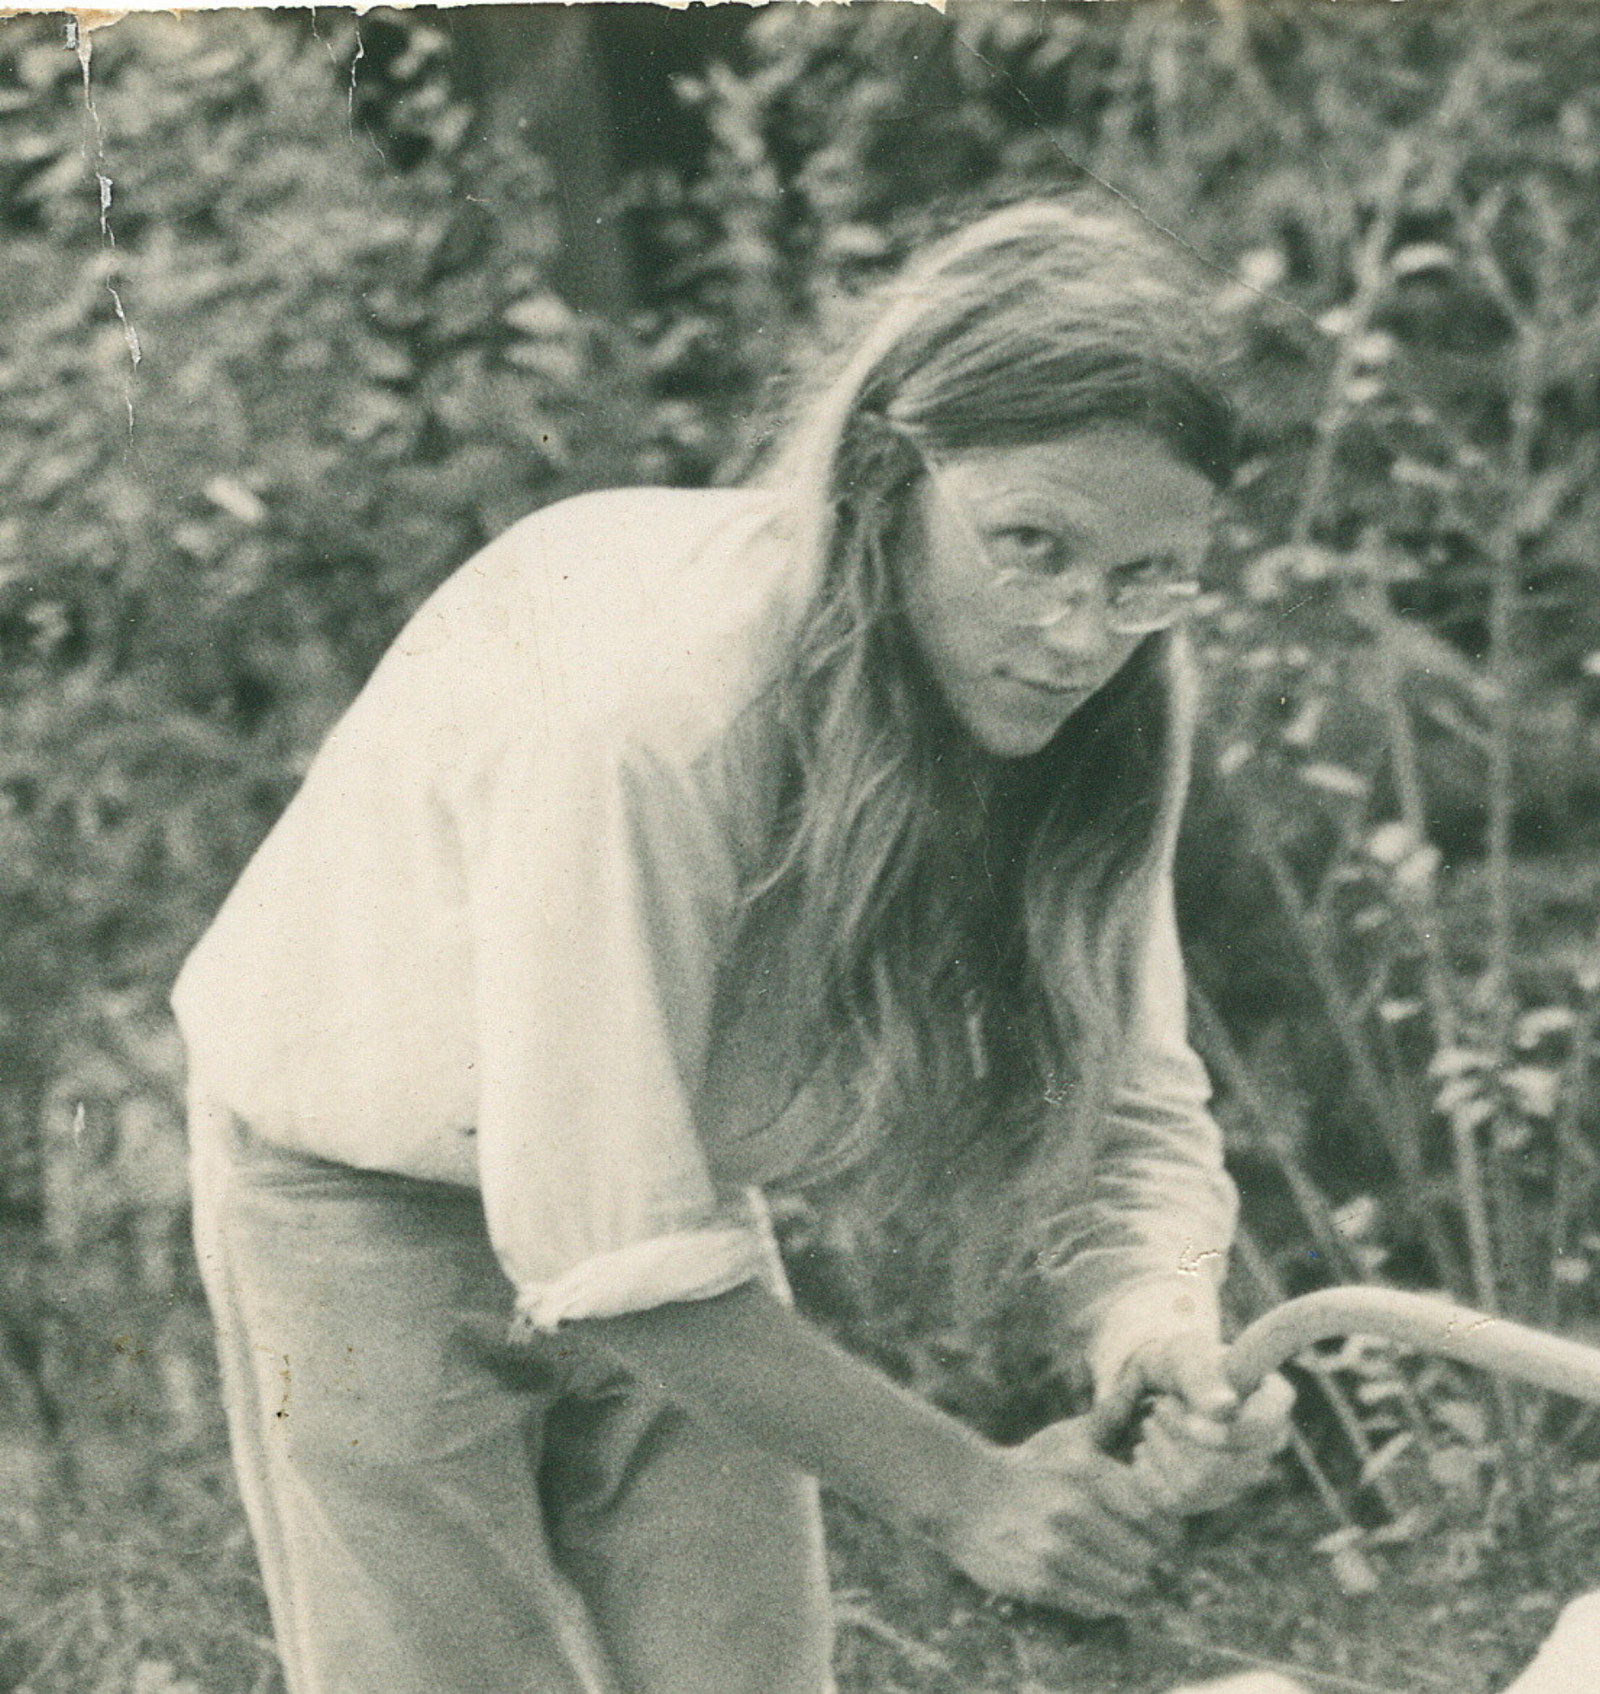 Black and white photo of young man using saw in garden setting.